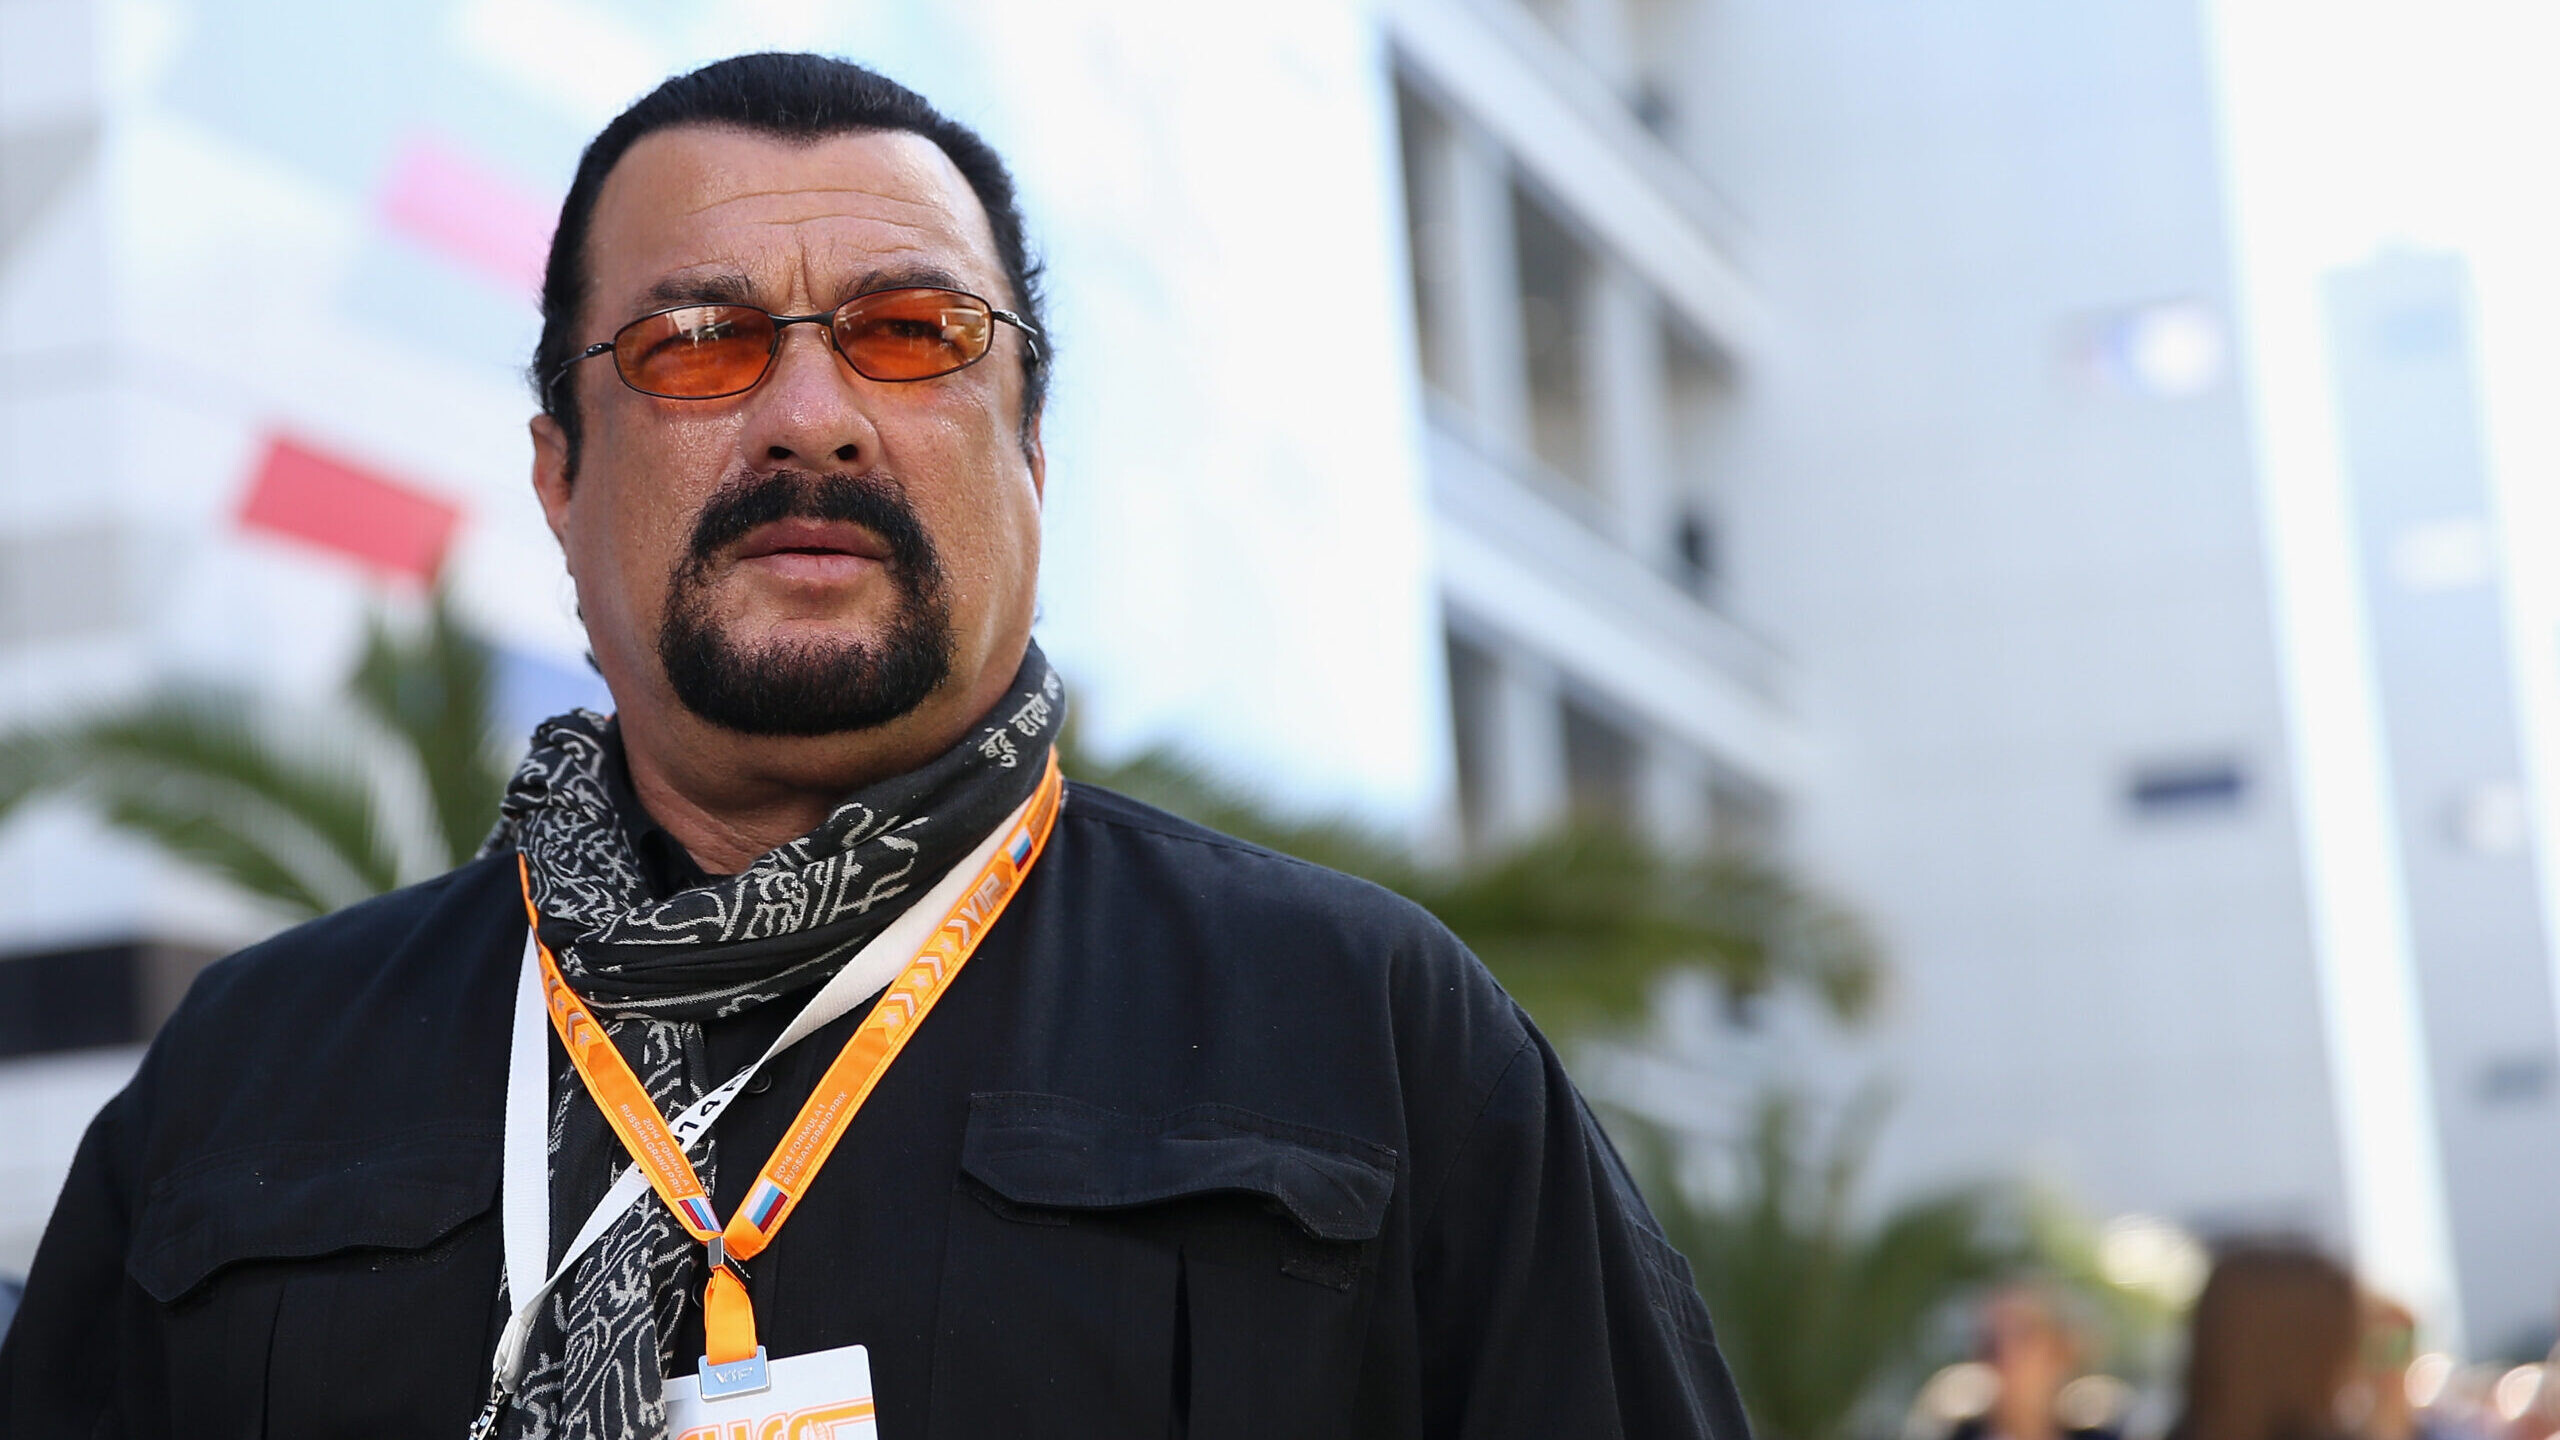 Steven Seagal: An American actor, film producer, screenwriter, martial artist, and musician, Appointed as Russian Special Envoy. 2560x1440 HD Background.